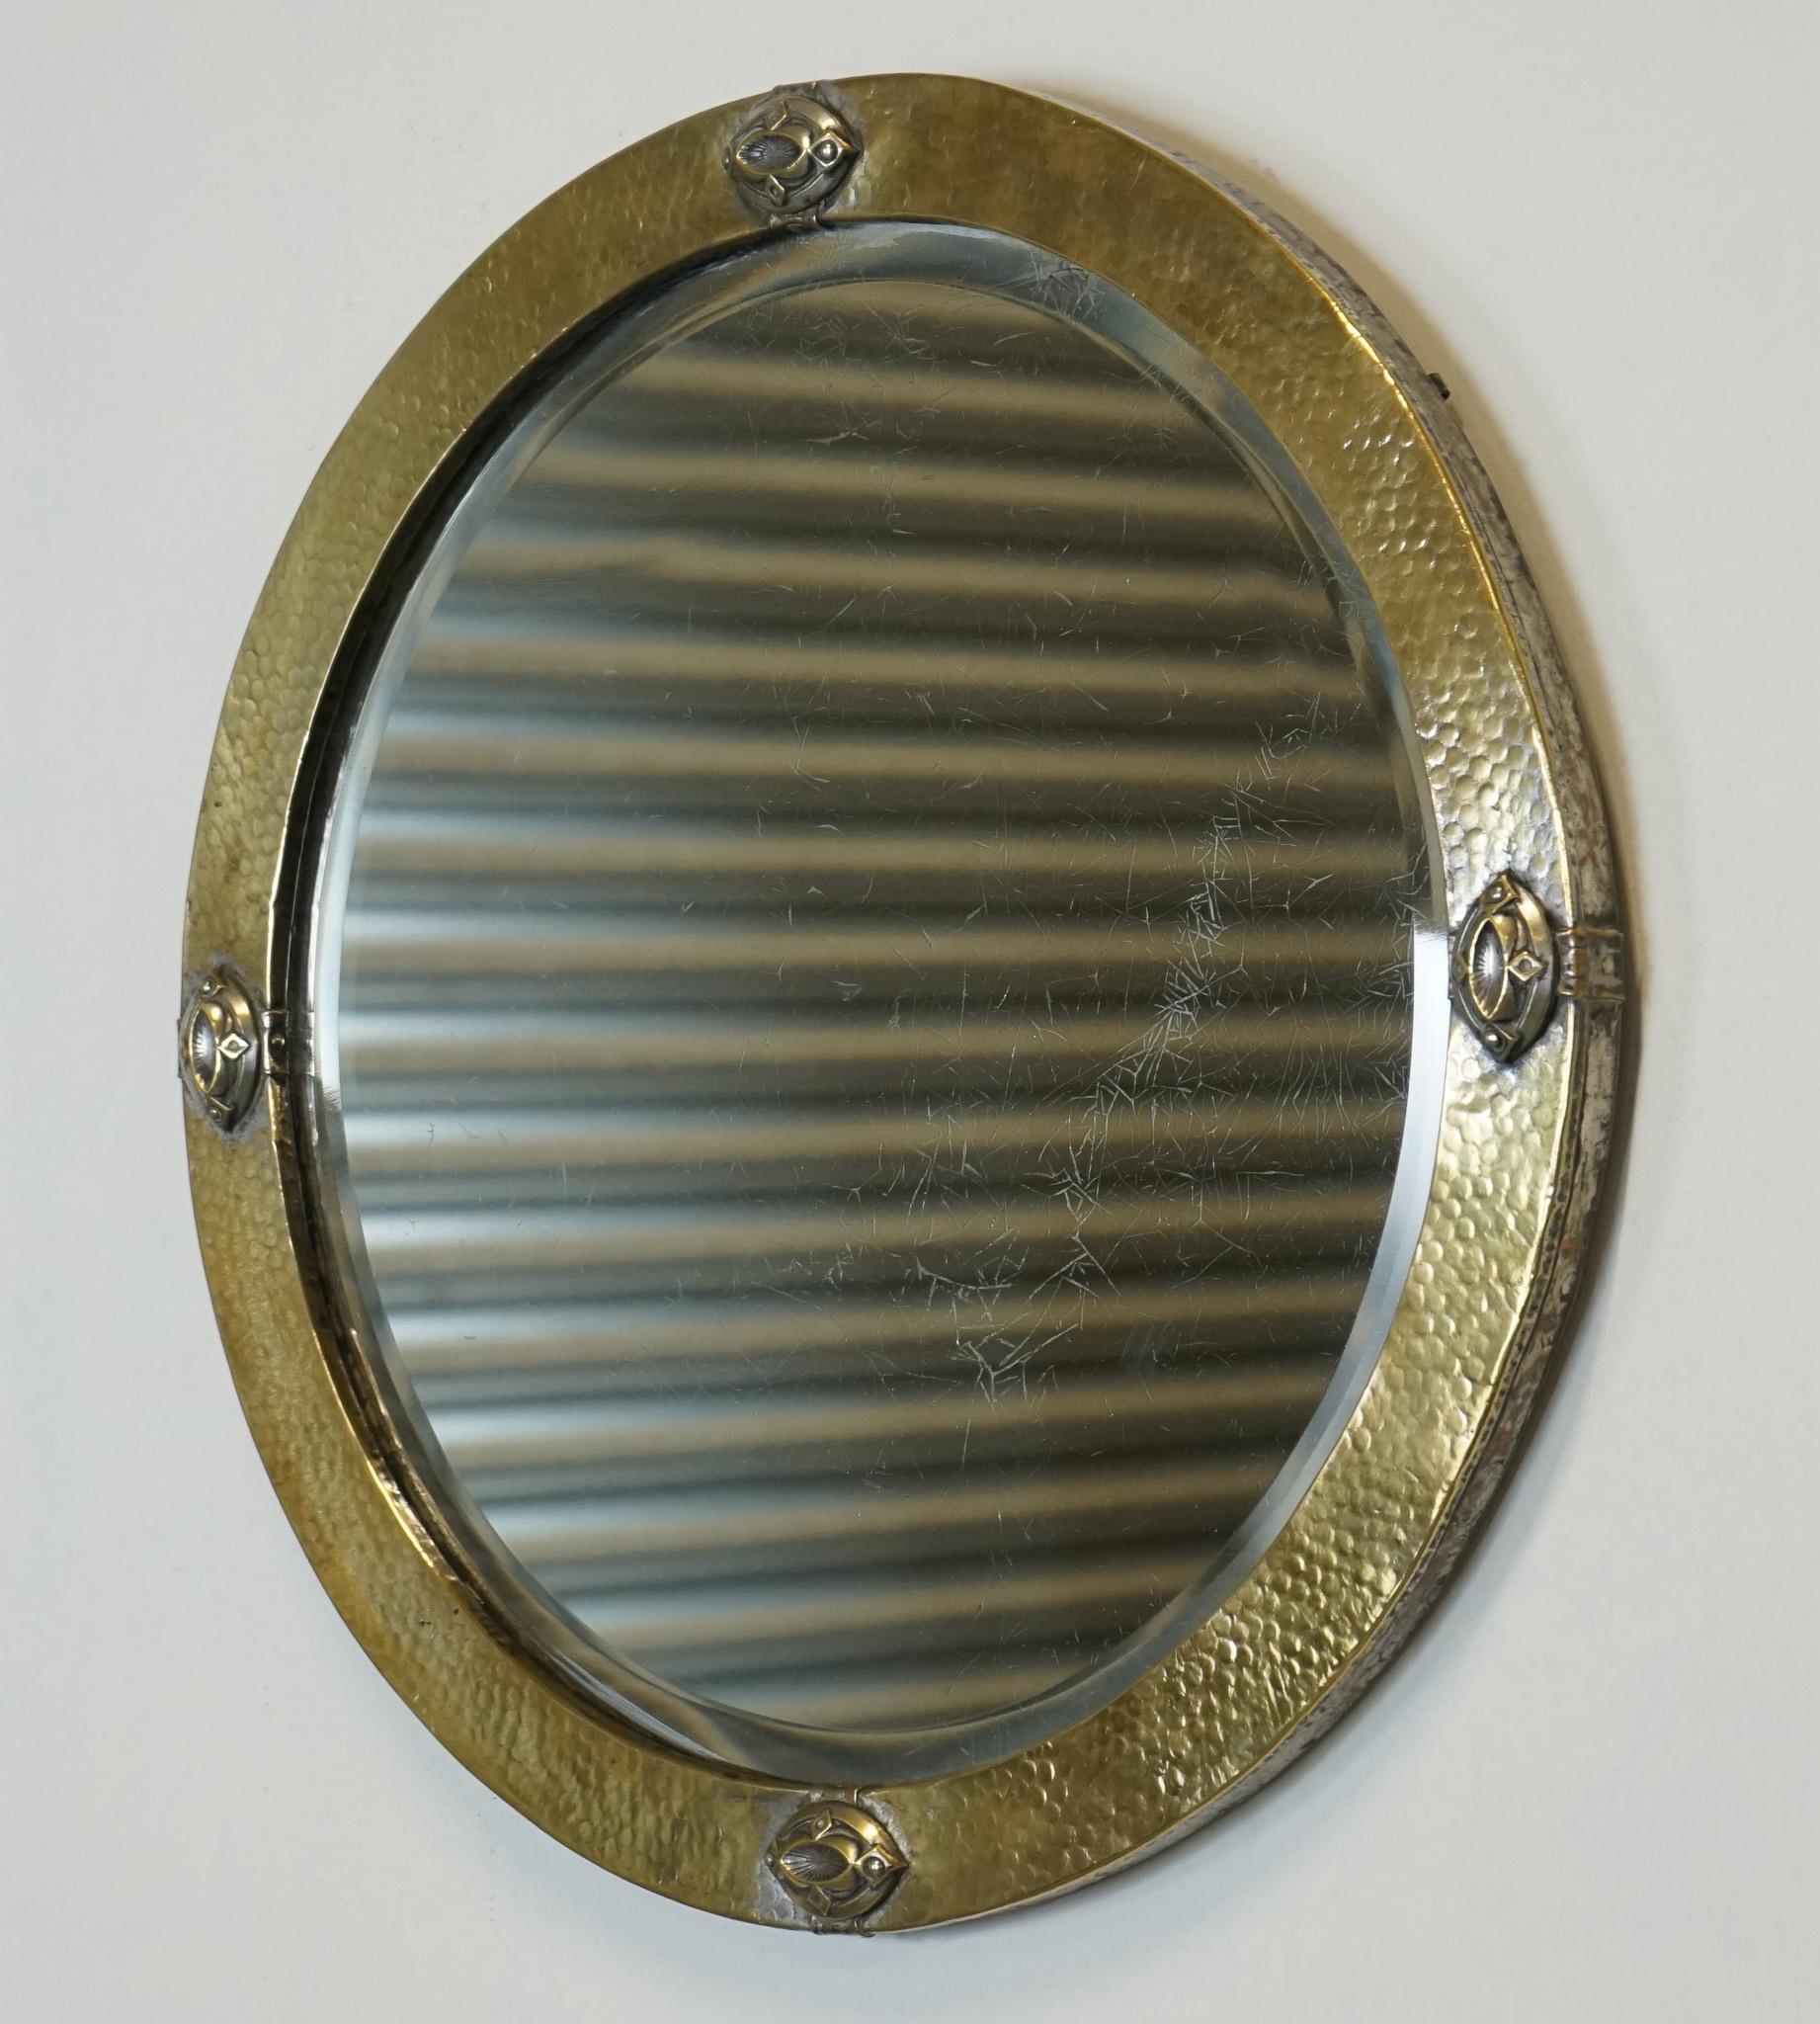 

We are delighted to offer for sale this Arts & Crafts Liberty's London Hammered Brass Mirror Circa 1910's

The Arts & Crafts Liberty's of London Hammered Brass Wall Mirror circa 1910 is a stunning example of the iconic Arts & Crafts movement that